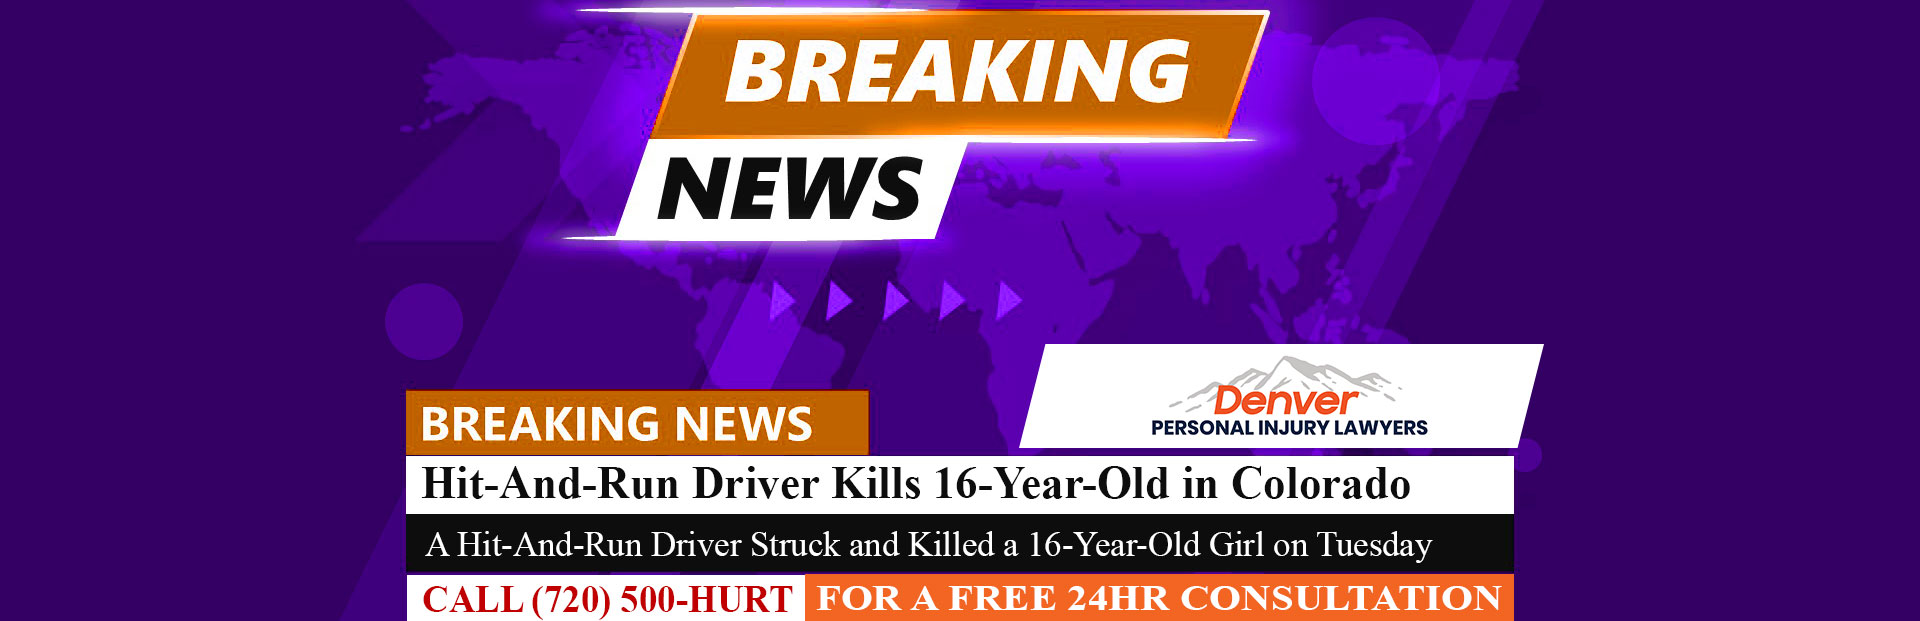 [04-13-23] Hit-And-Run Driver Kills 16-Year-Old in Colorado